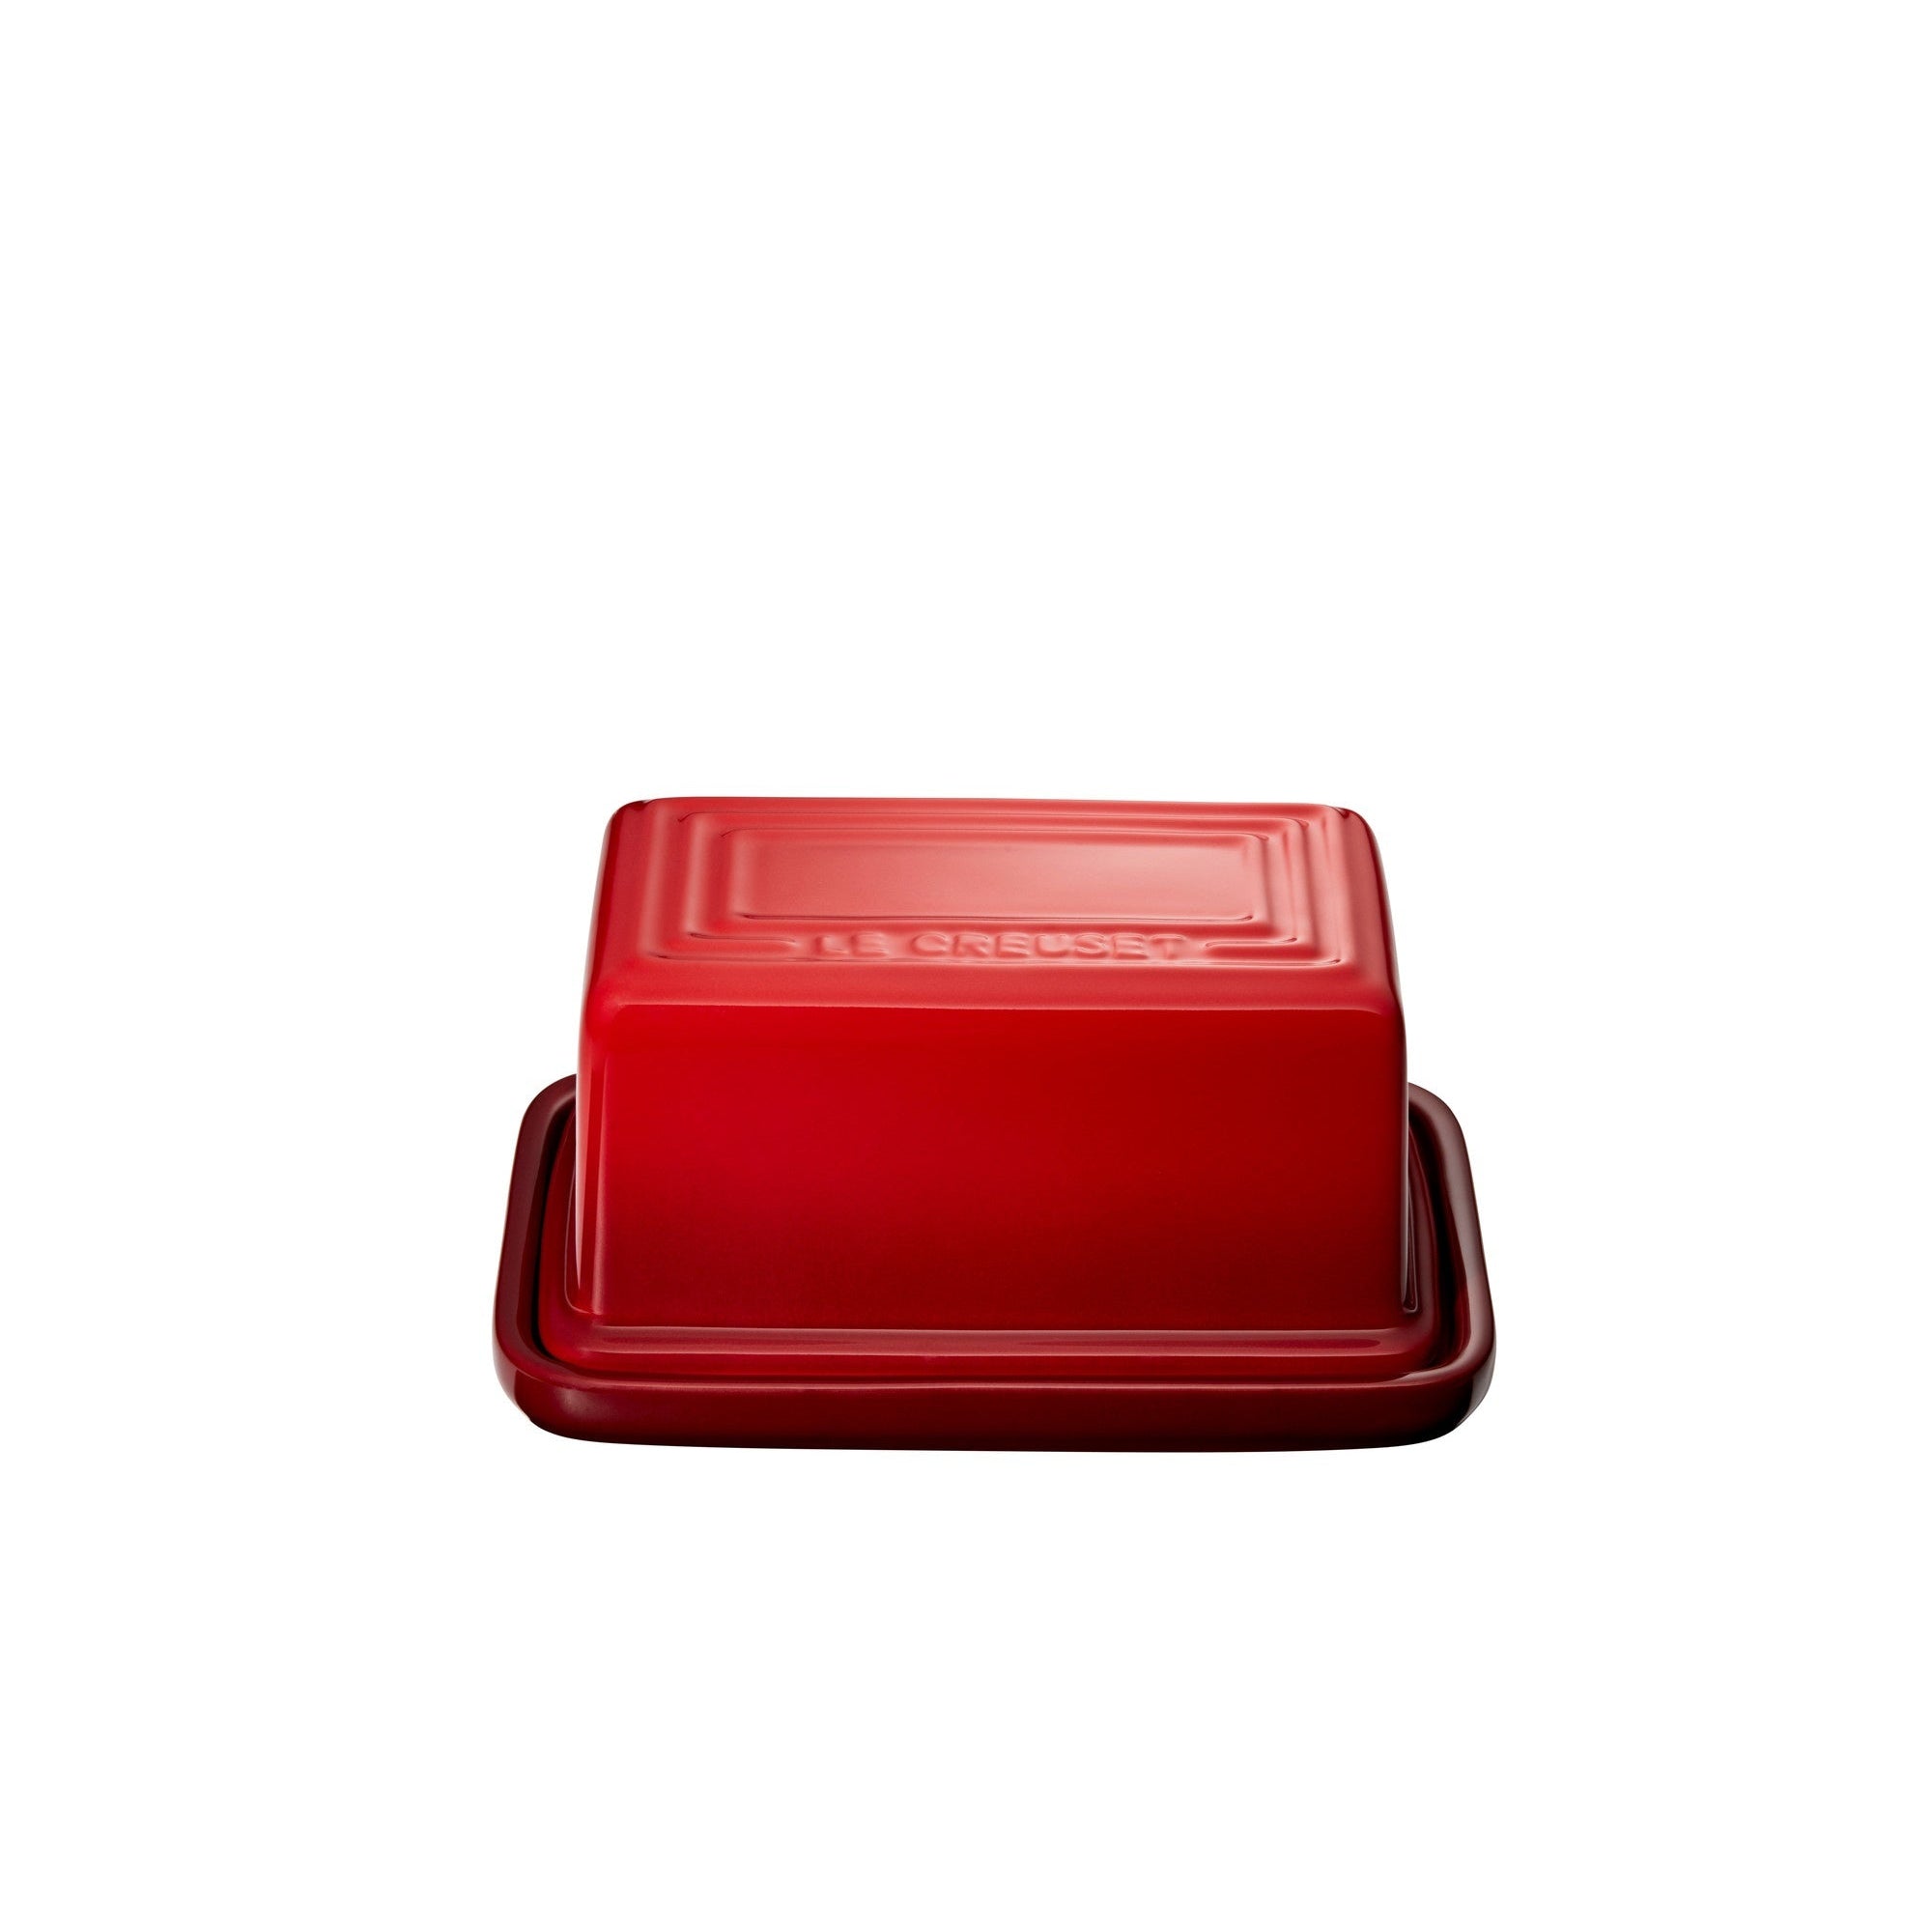 Le Creuset Classic Butter Dish Cherry Red / Cerise